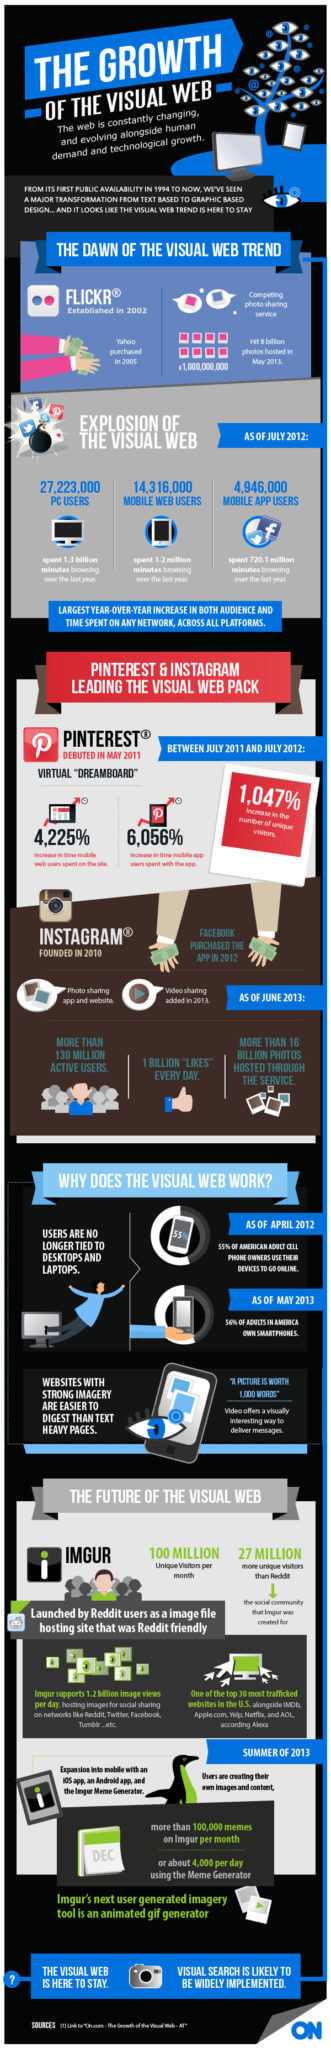 The history of the visual web infographic